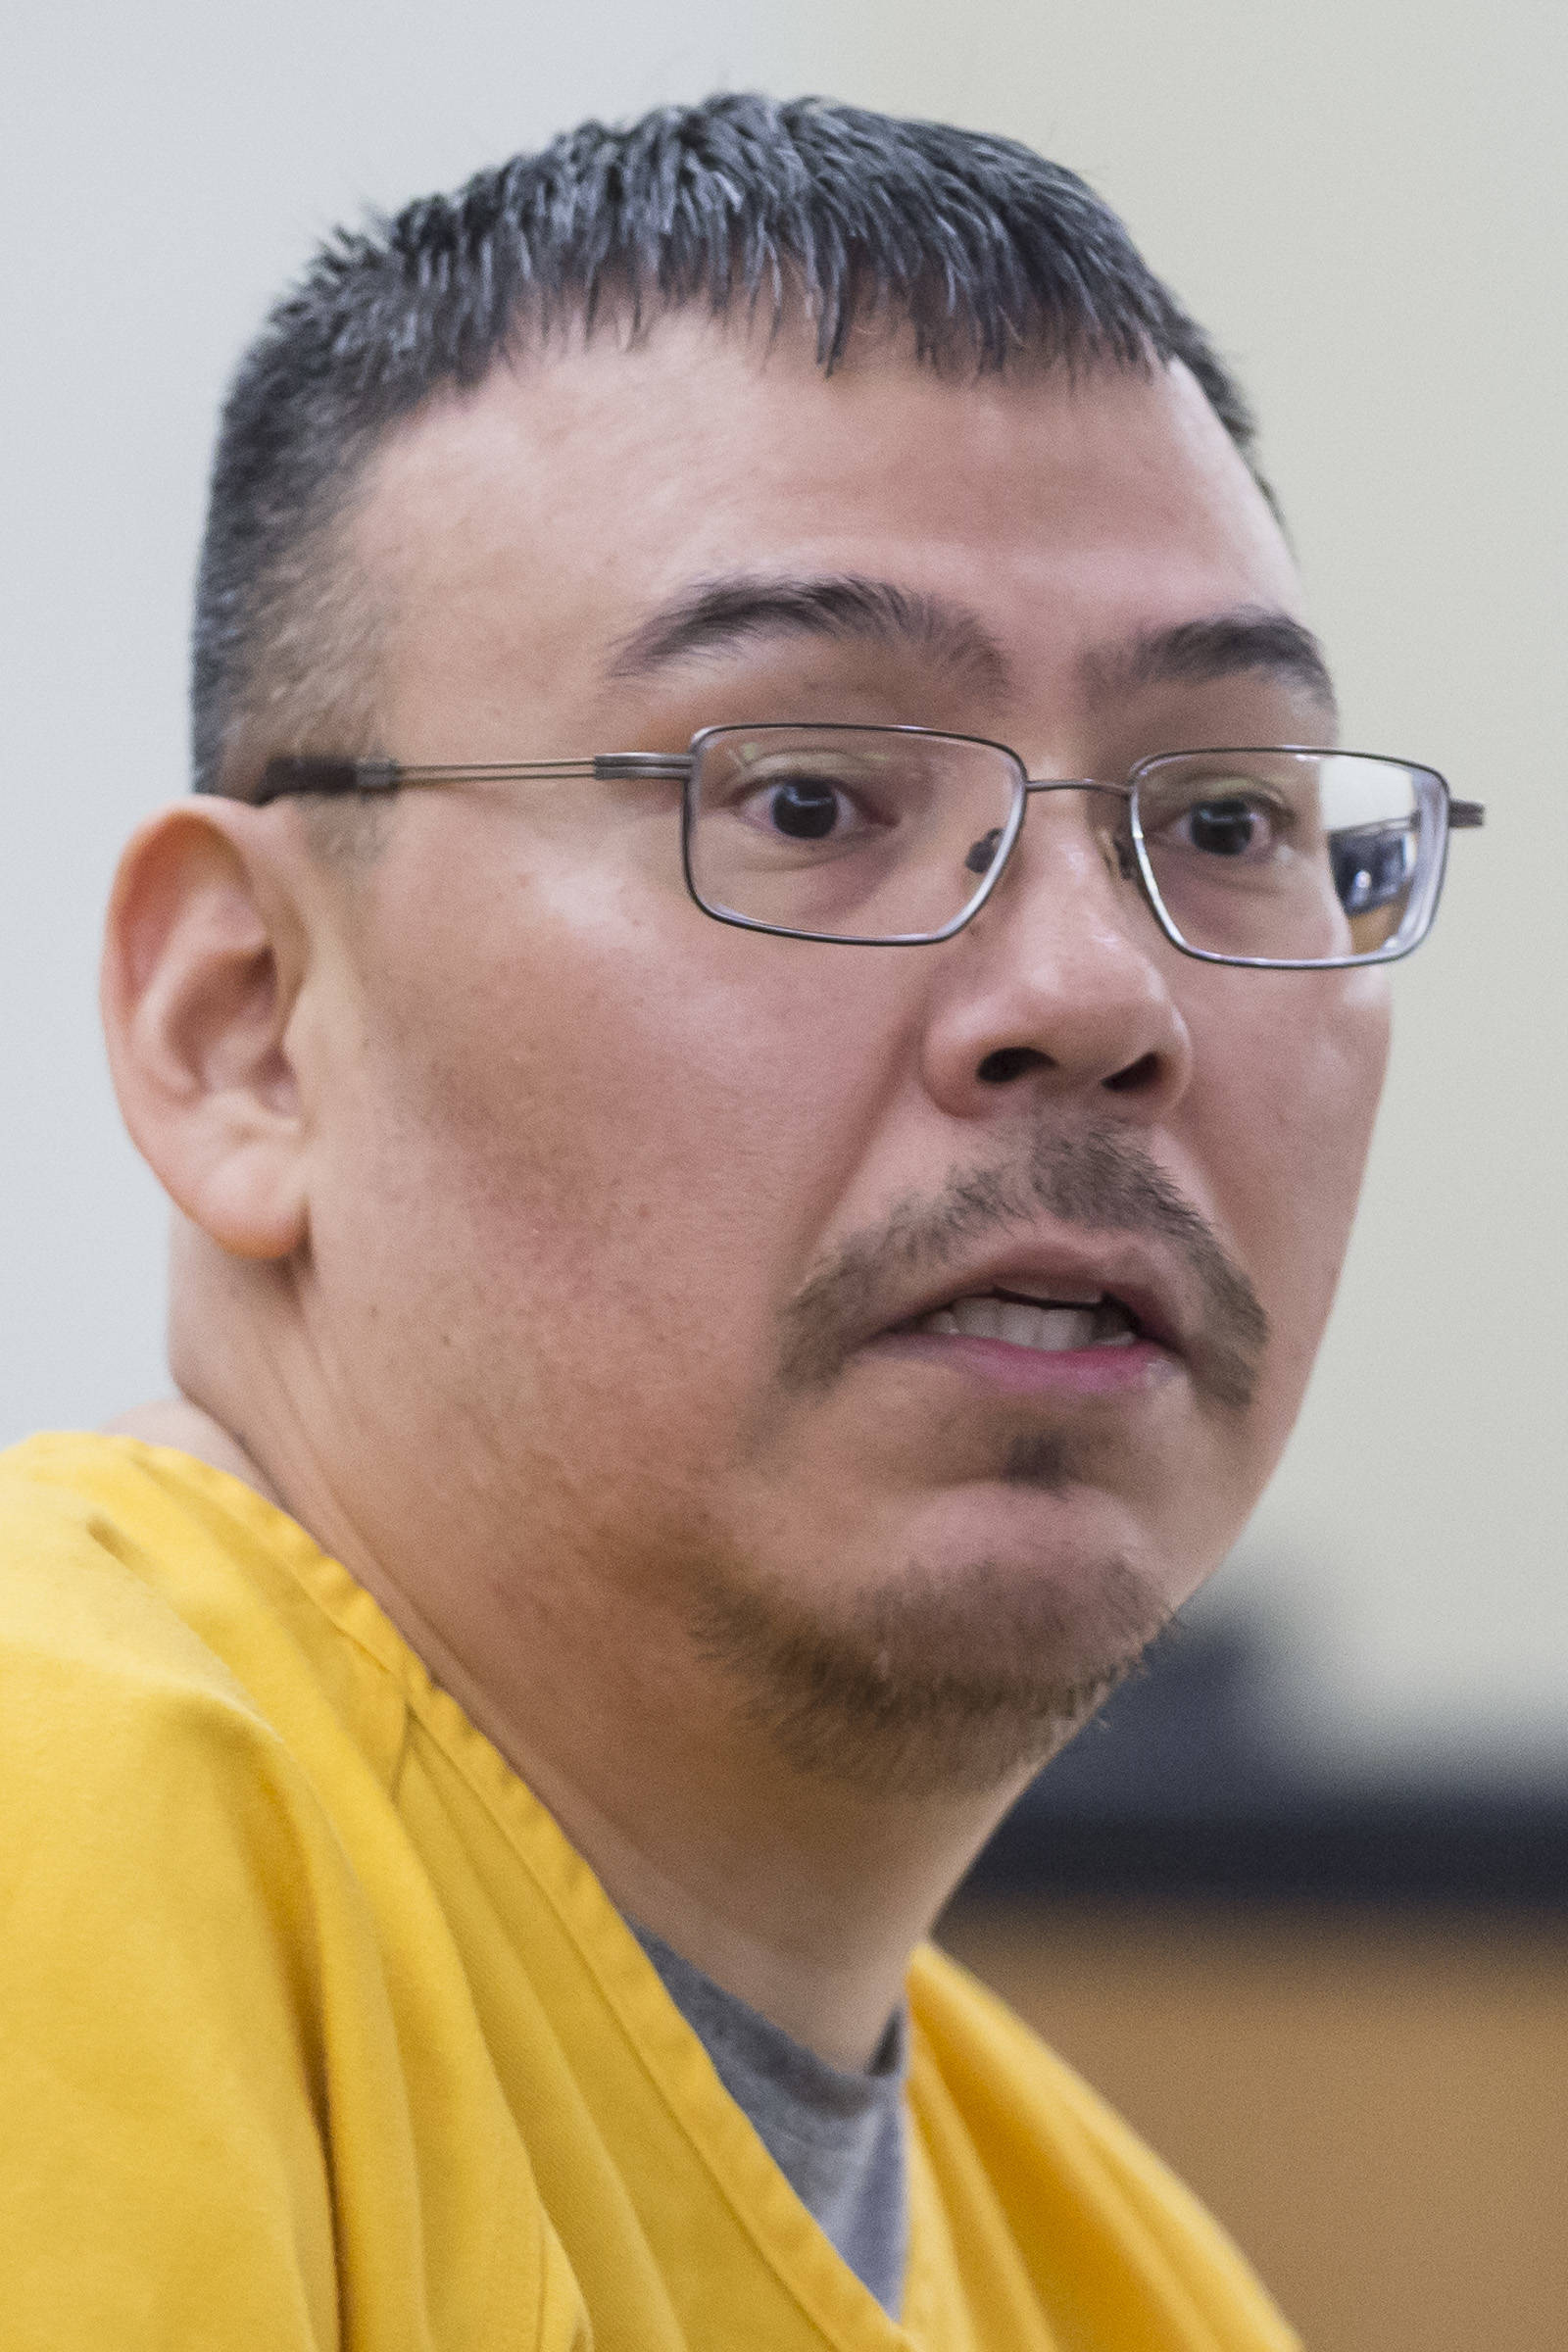 Thomas Jack Jr., 42, appears for sentencing in Juneau Superior Court for sexually abusing an 11-year-old girl placed in his and his wife’s care in 2009. (Michael Penn | Juneau Empire)